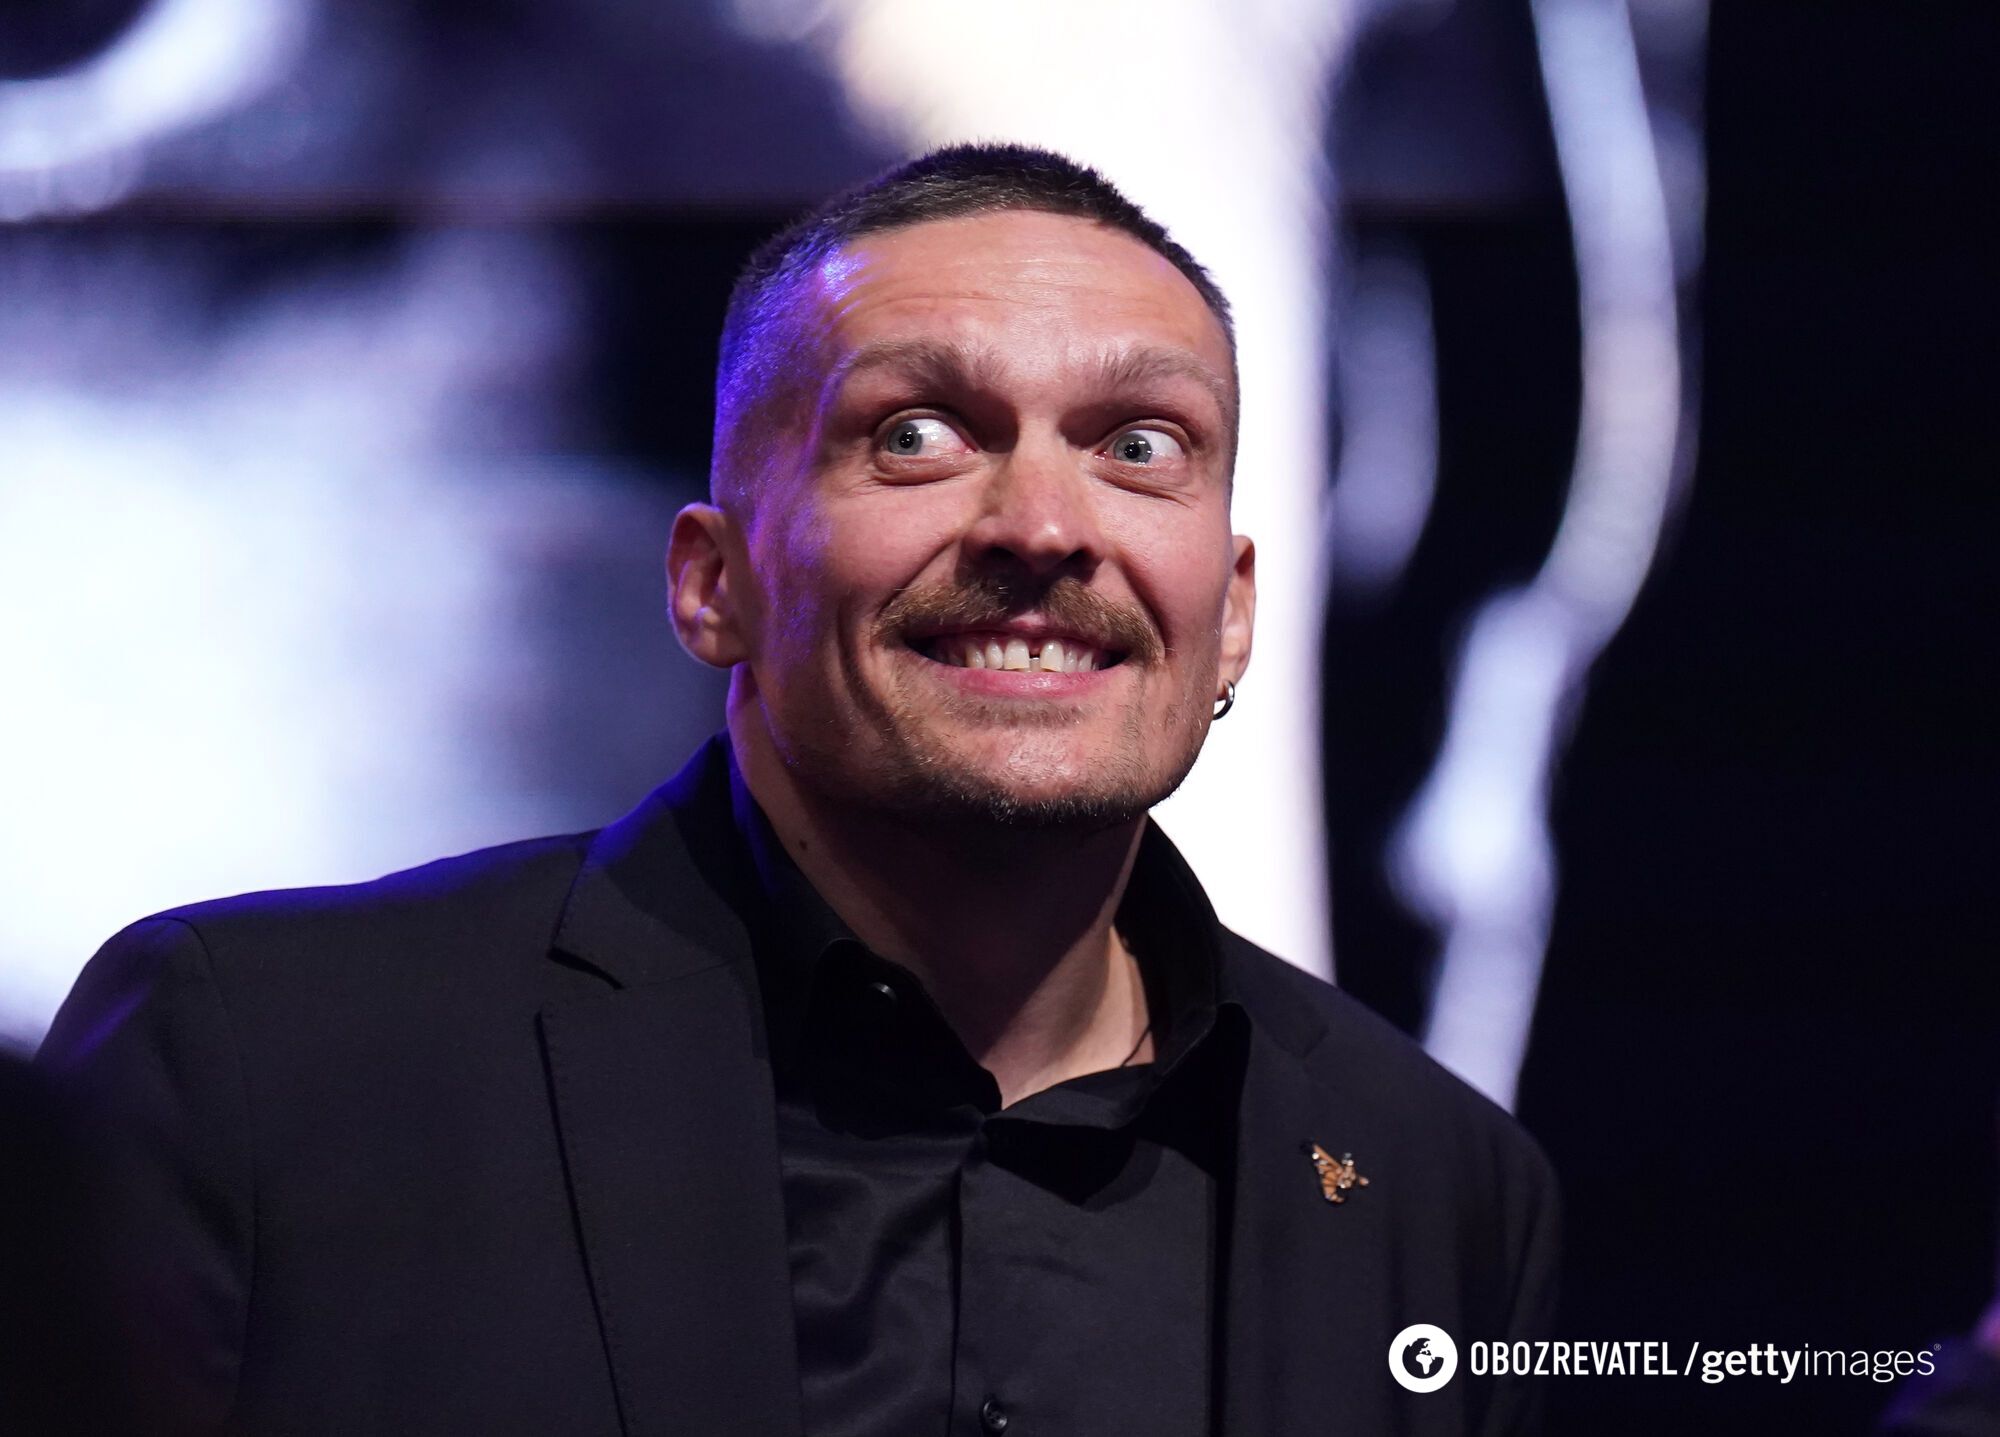 ''He will win, but...'' Joshua called Usyk's victory over Fury unfavorable